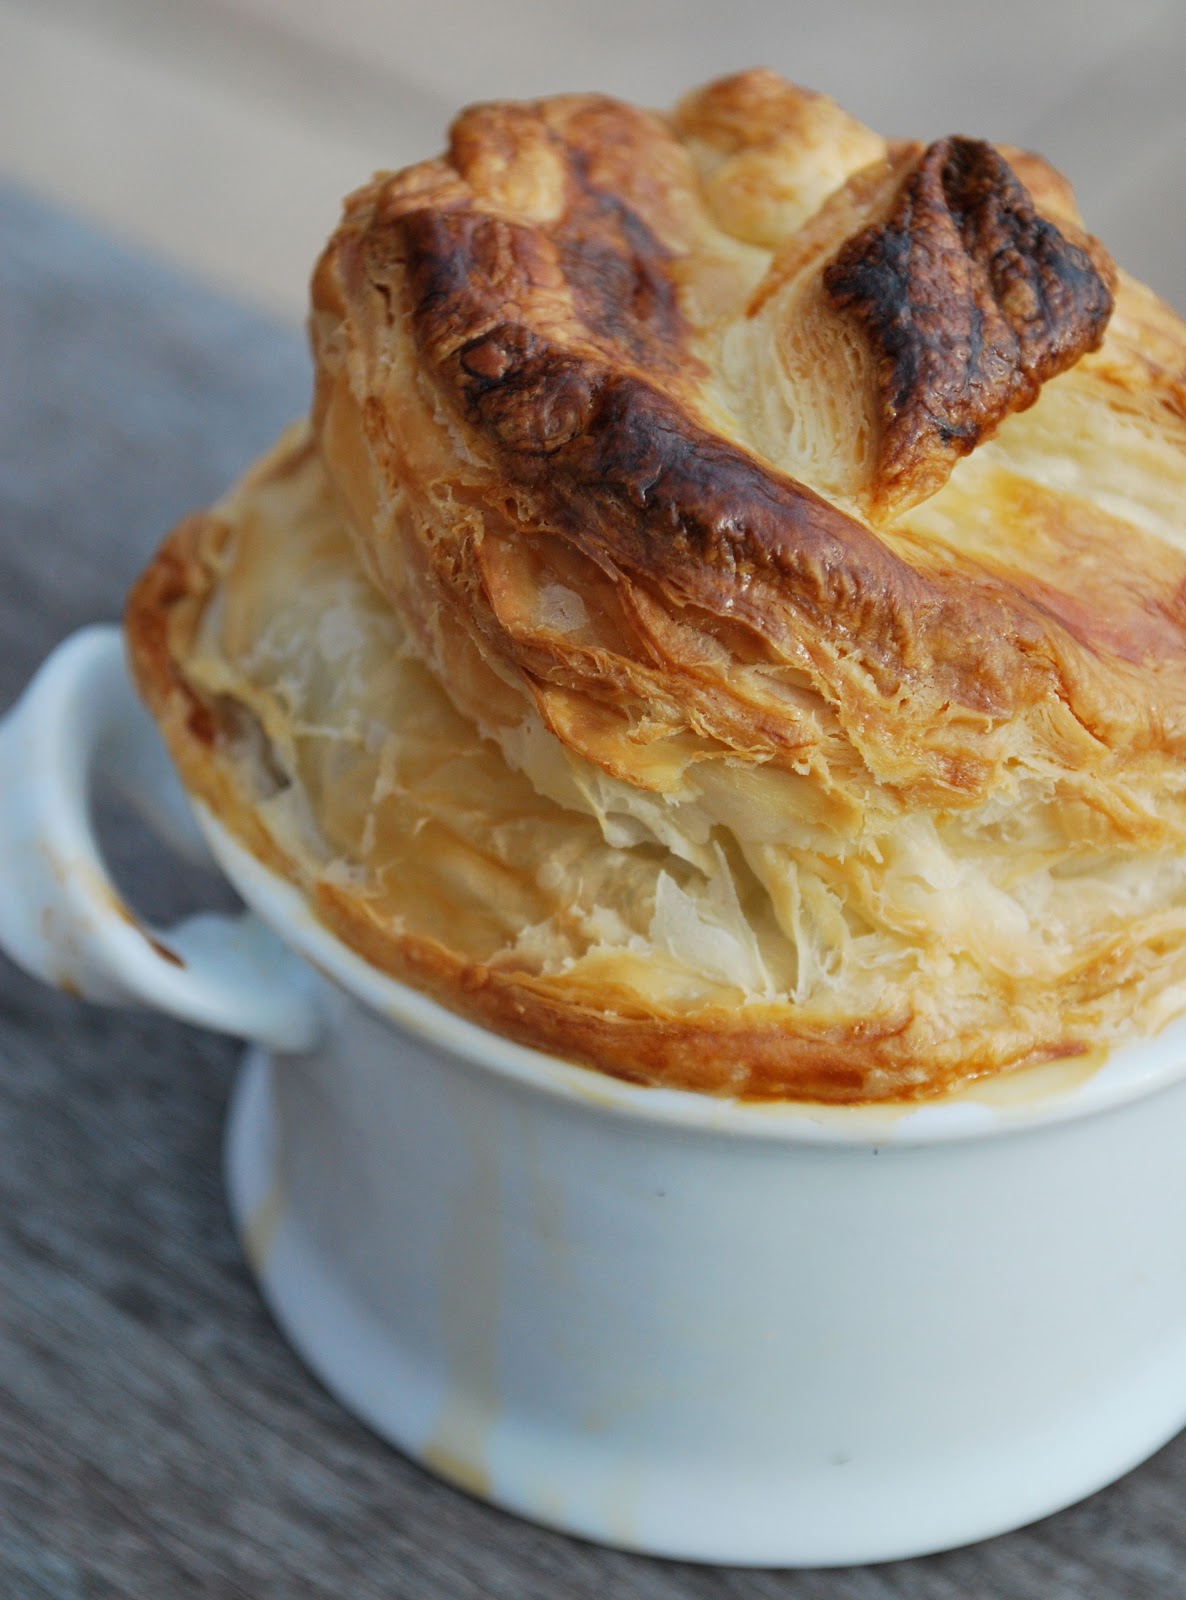 Scrumpdillyicious: Chicken Pot Pie with a Crown of Puff Pastry